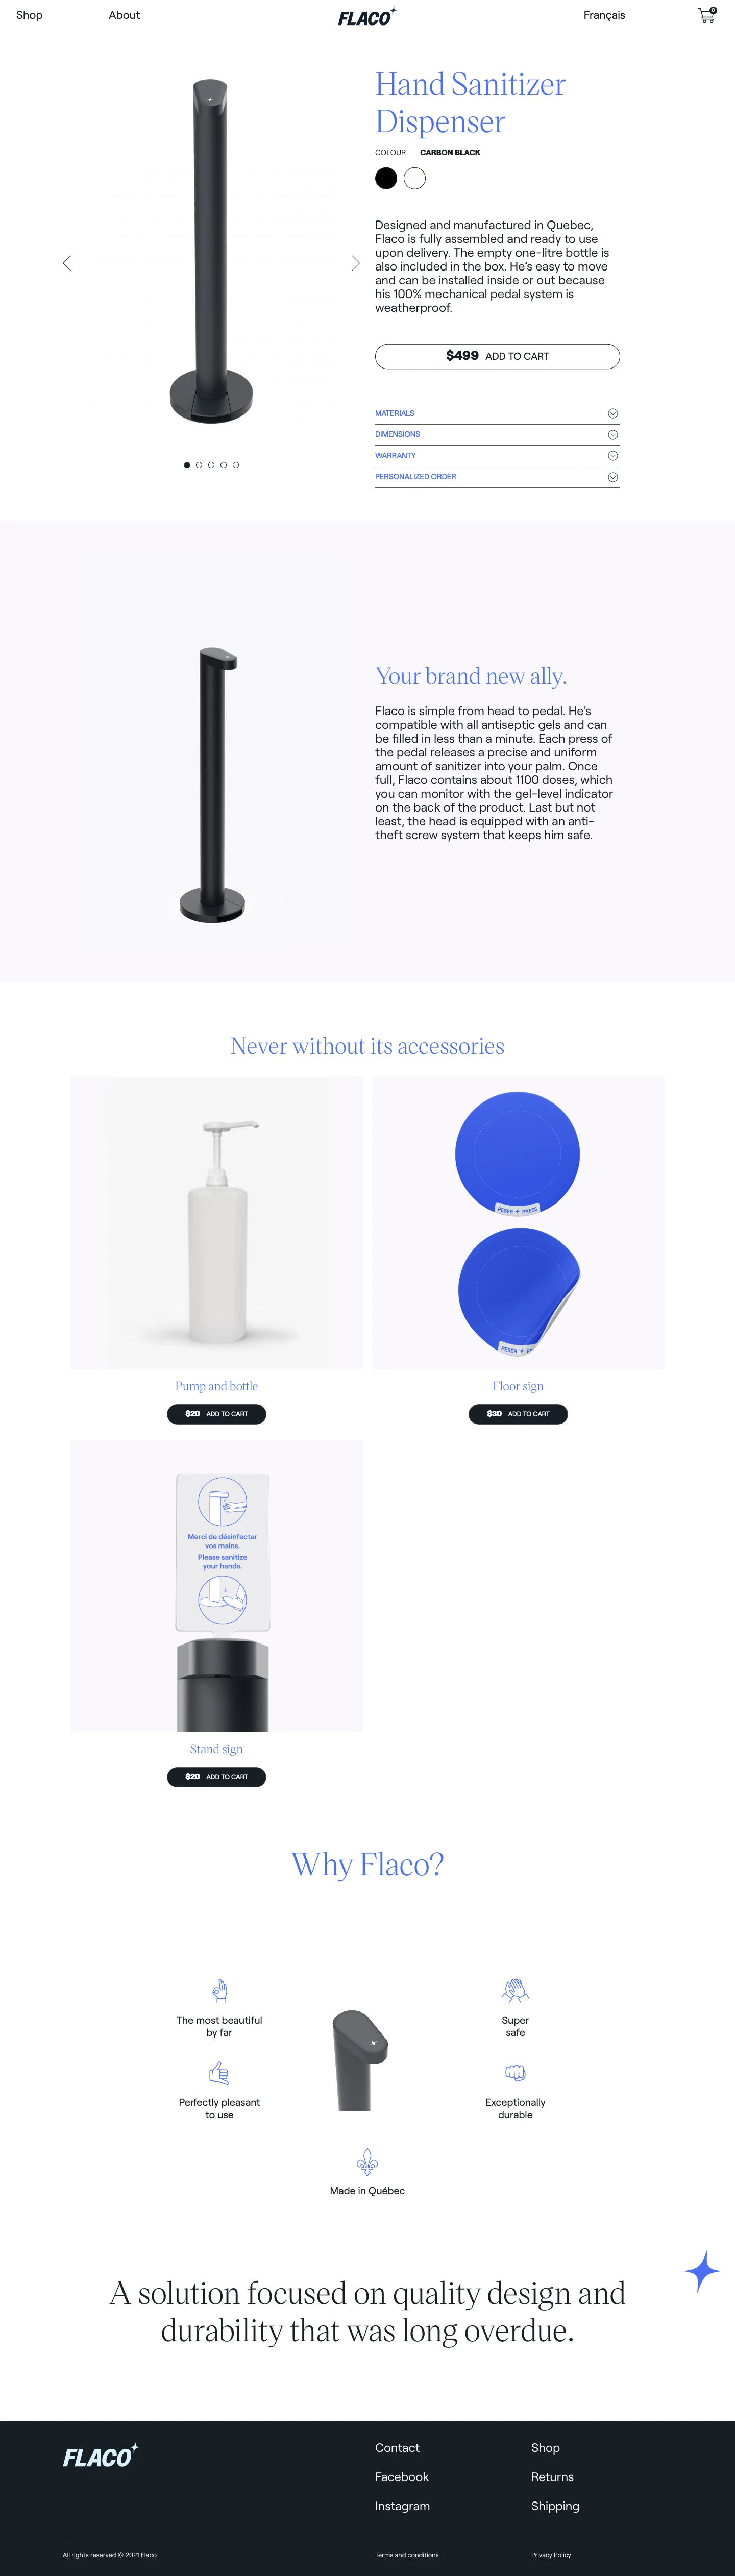 Flaco Landing Page Example: Discover Flaco, durable, design and locally made. Offer a bright start to your customers with this hand sanitizer dispenser